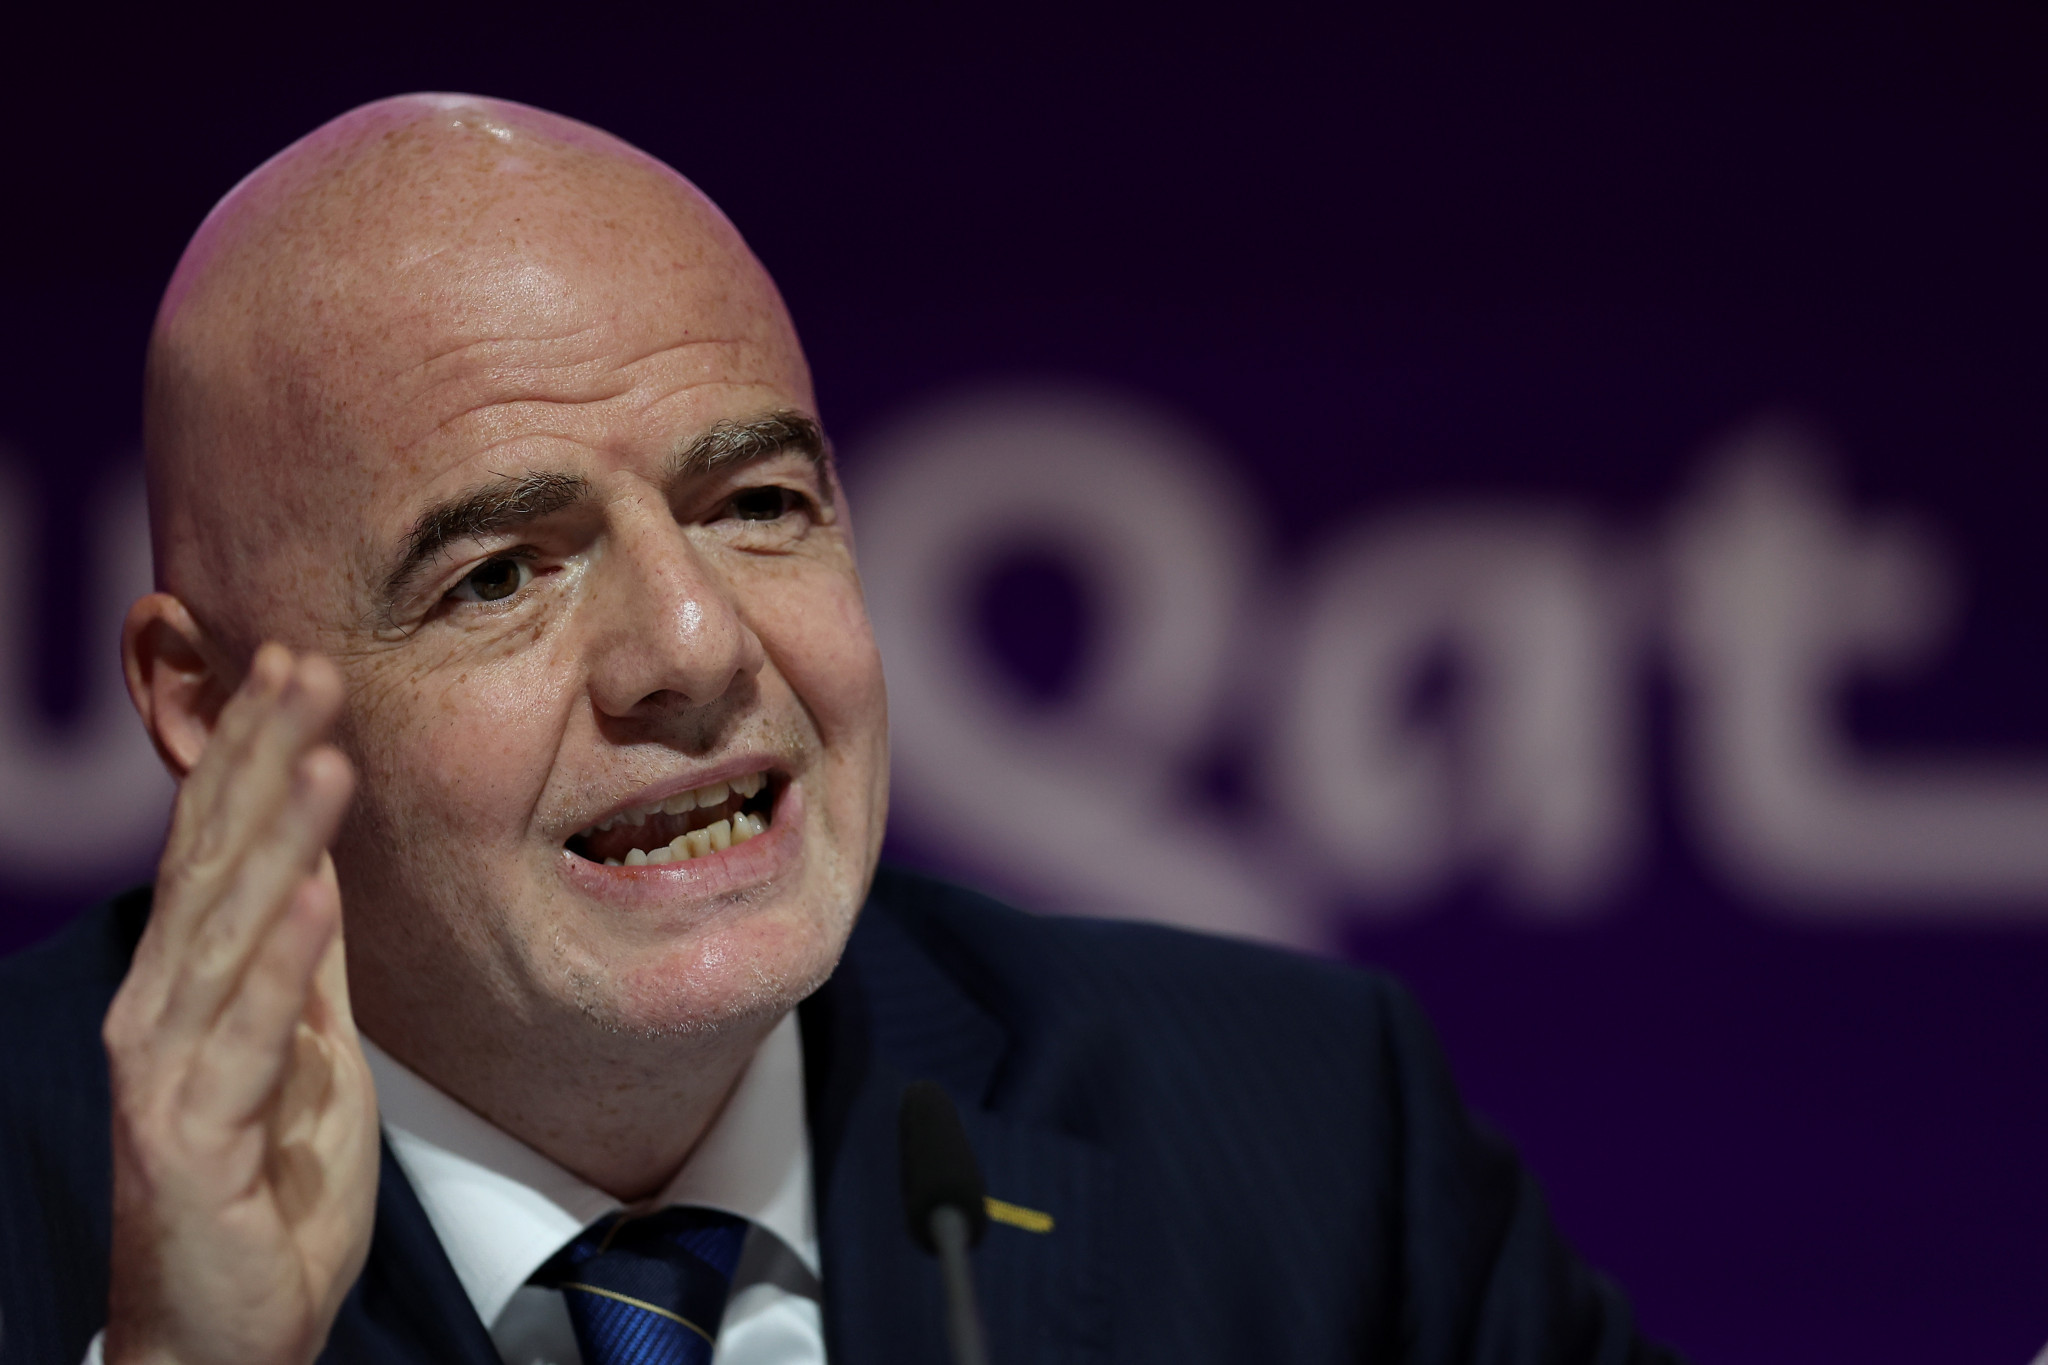 FIFA President Gianni Infantino said the partners were associated with an 